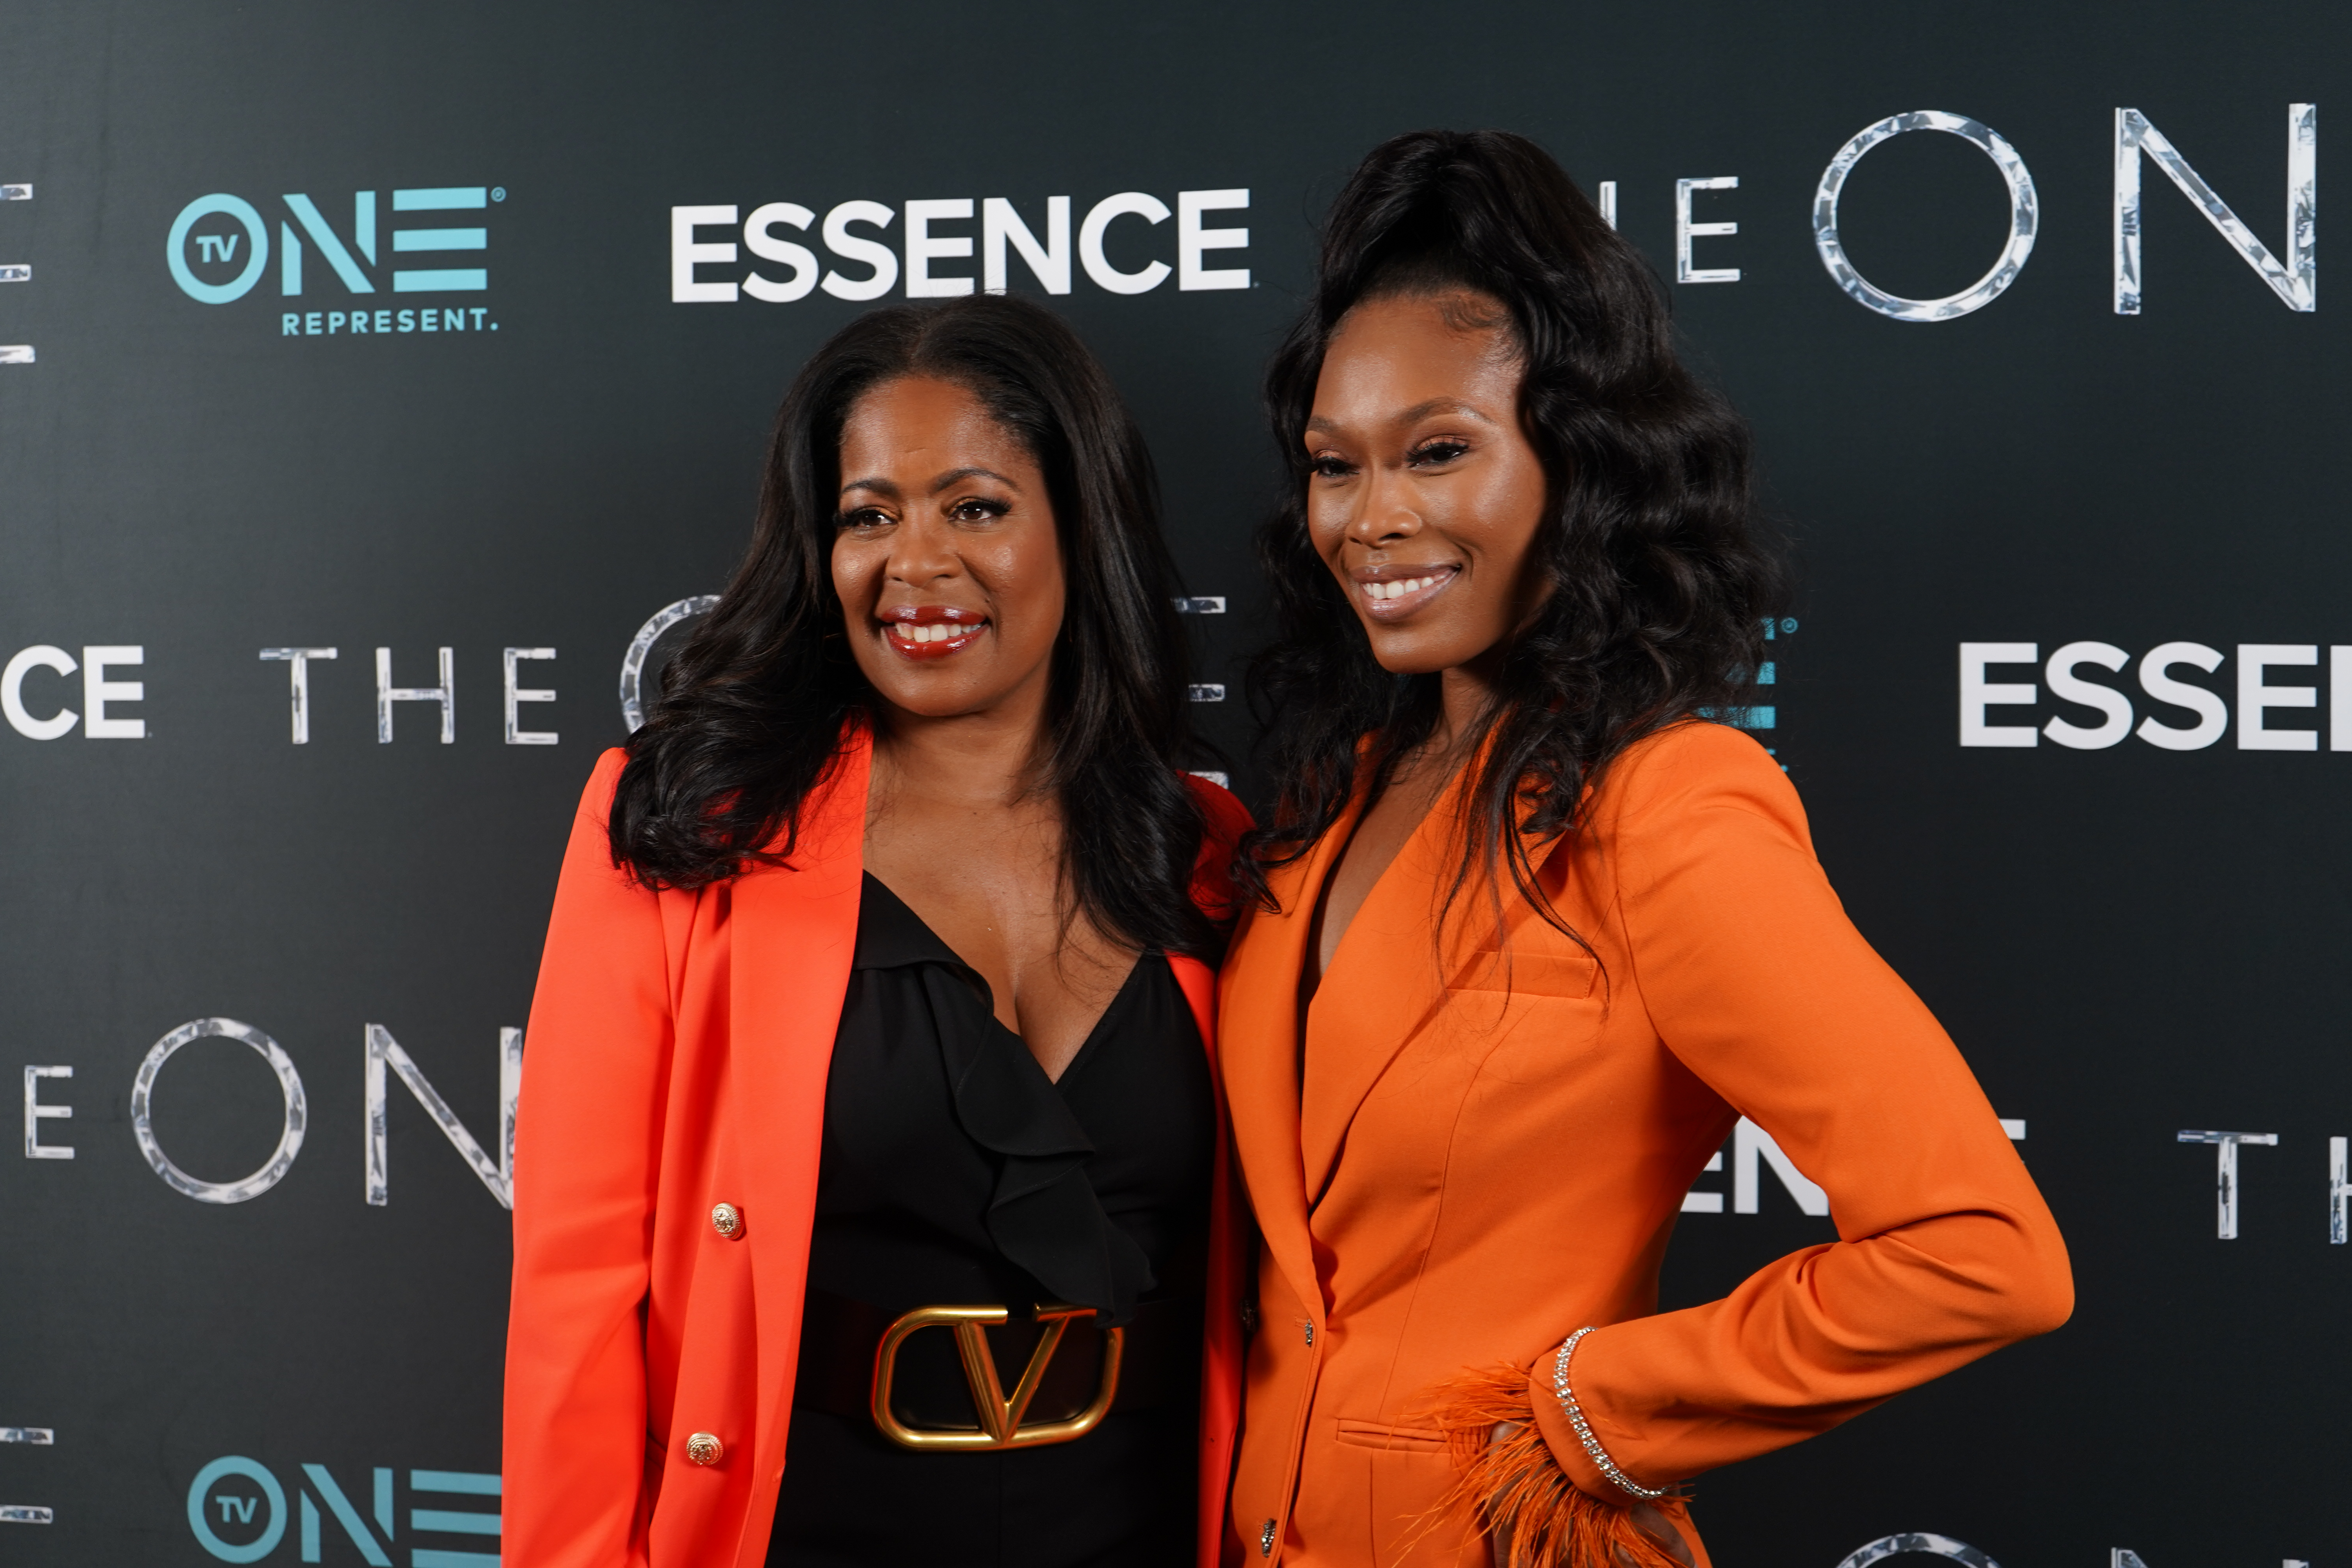 Michelle Rice and Ashley Evans at TV One's NYC Premier Screening of 'The One'